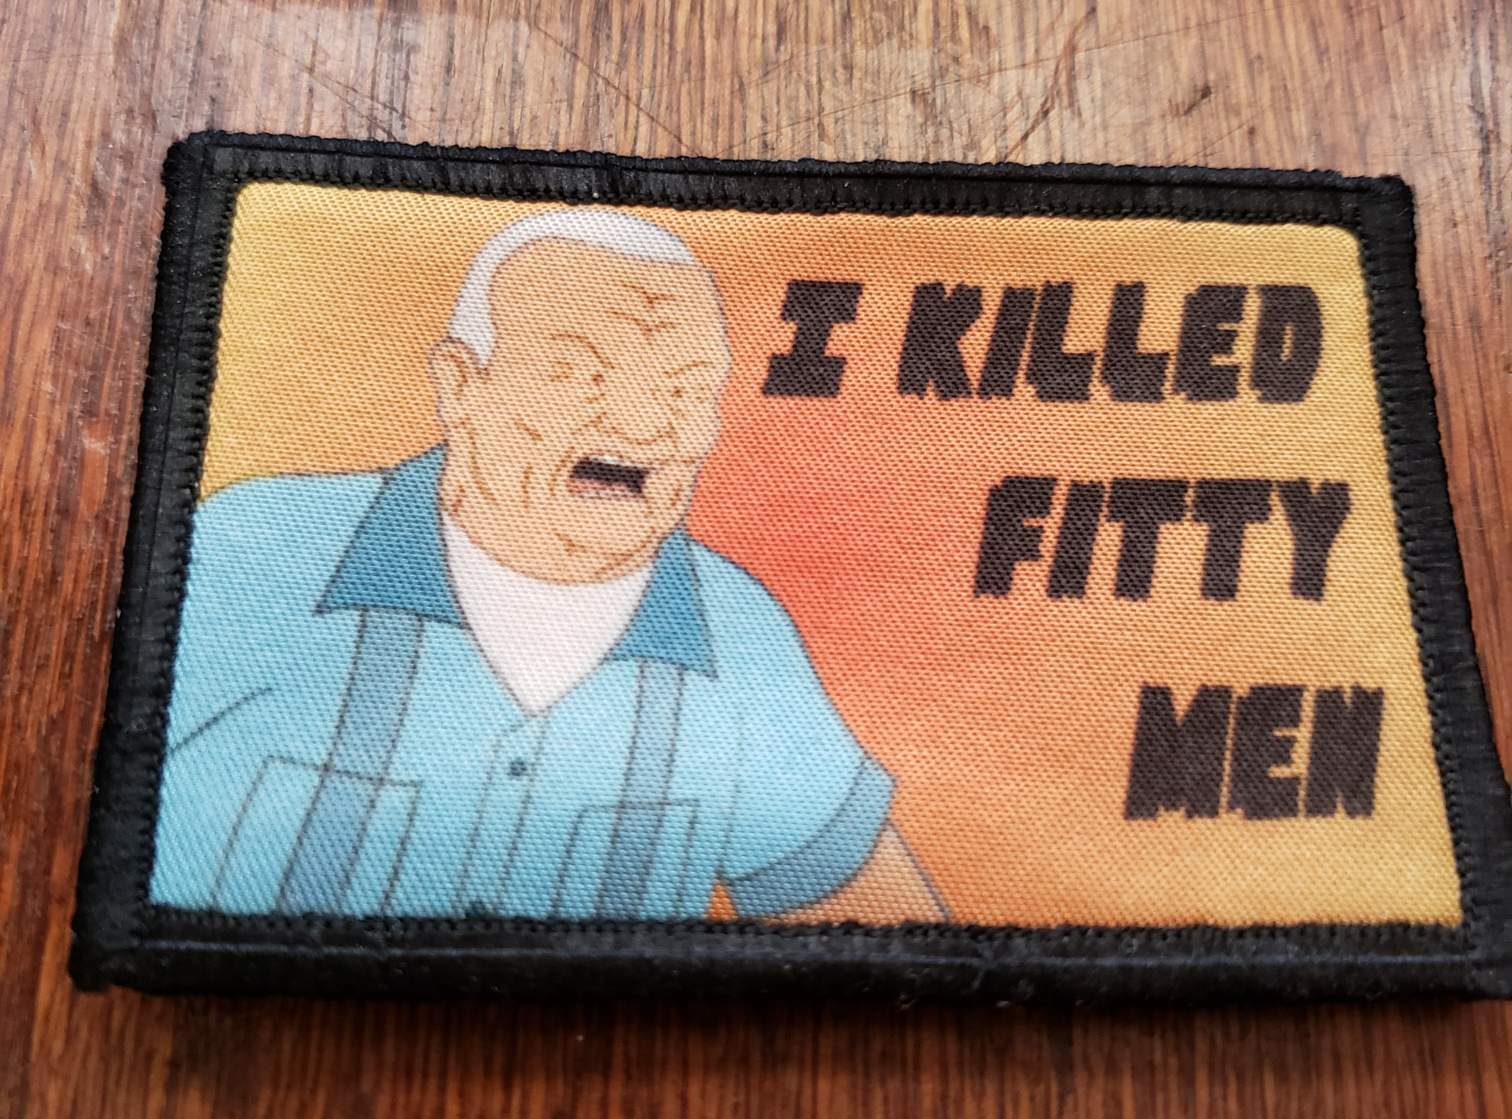 King of the Hill  I Killed Fitty Men Morale Patch Tactical Military Army Funny 